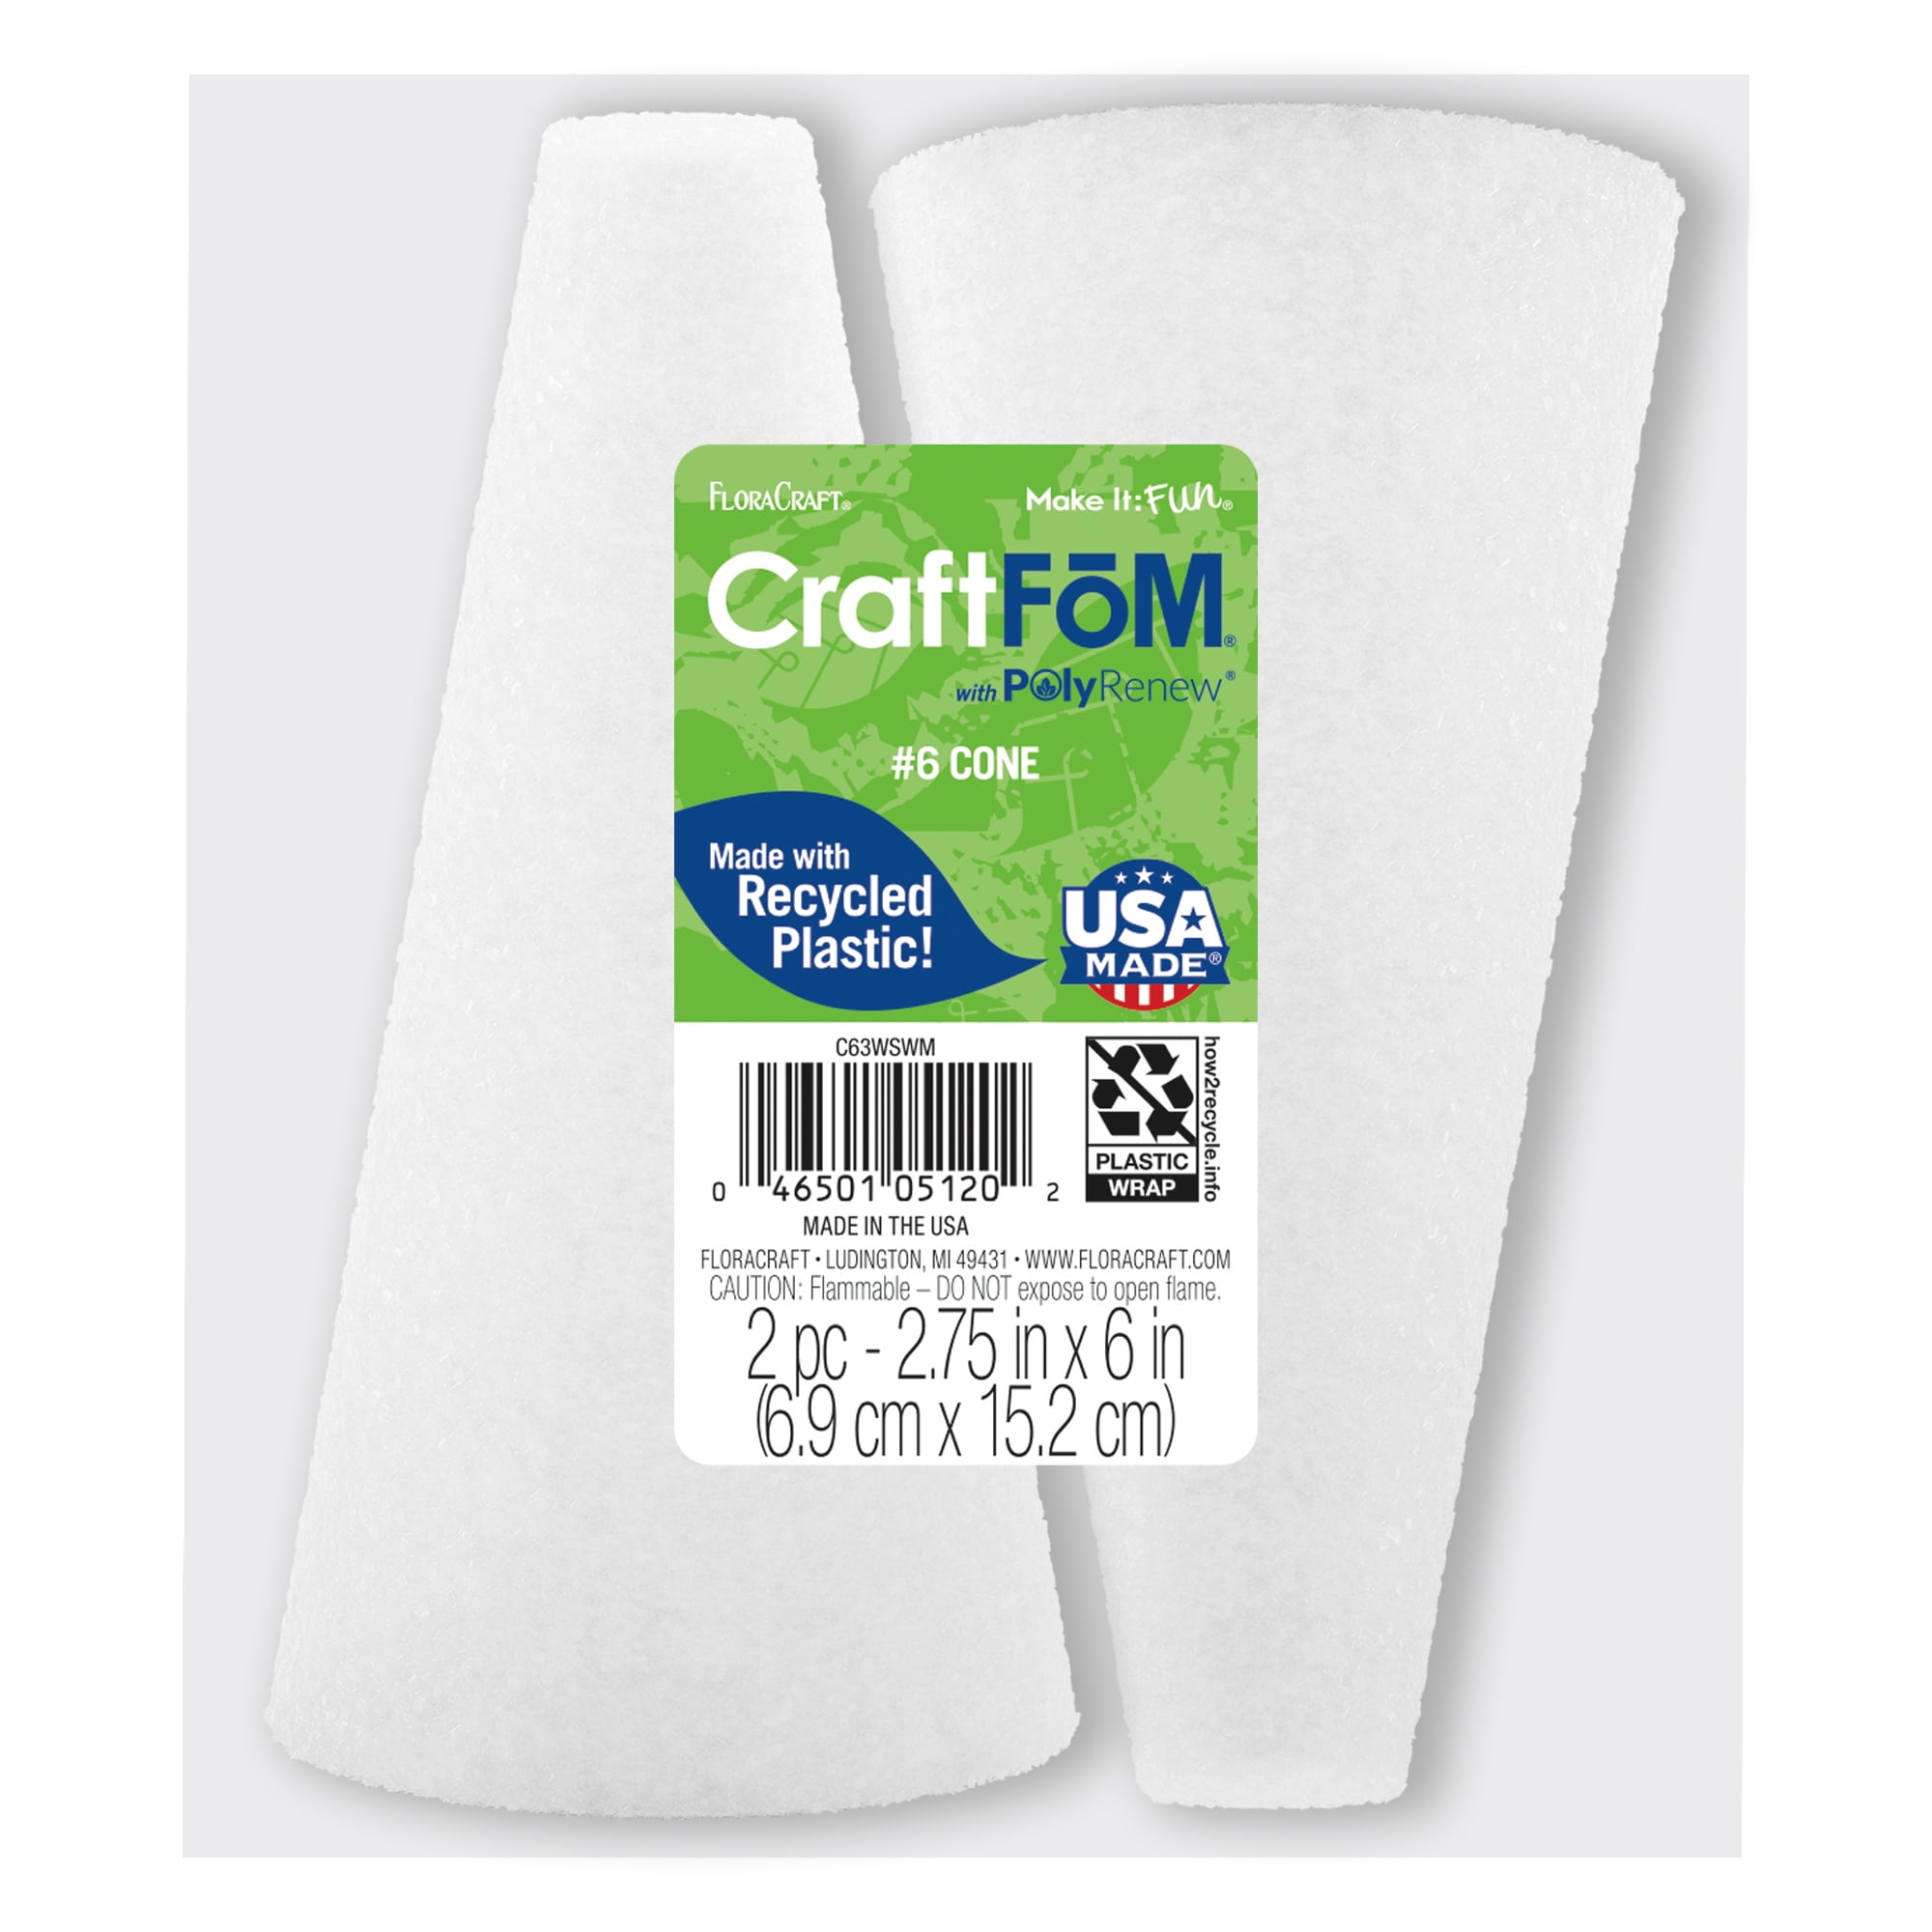 Best Deal for Foam Cones for Crafts 13 x 7.6 Inches Styrofoam